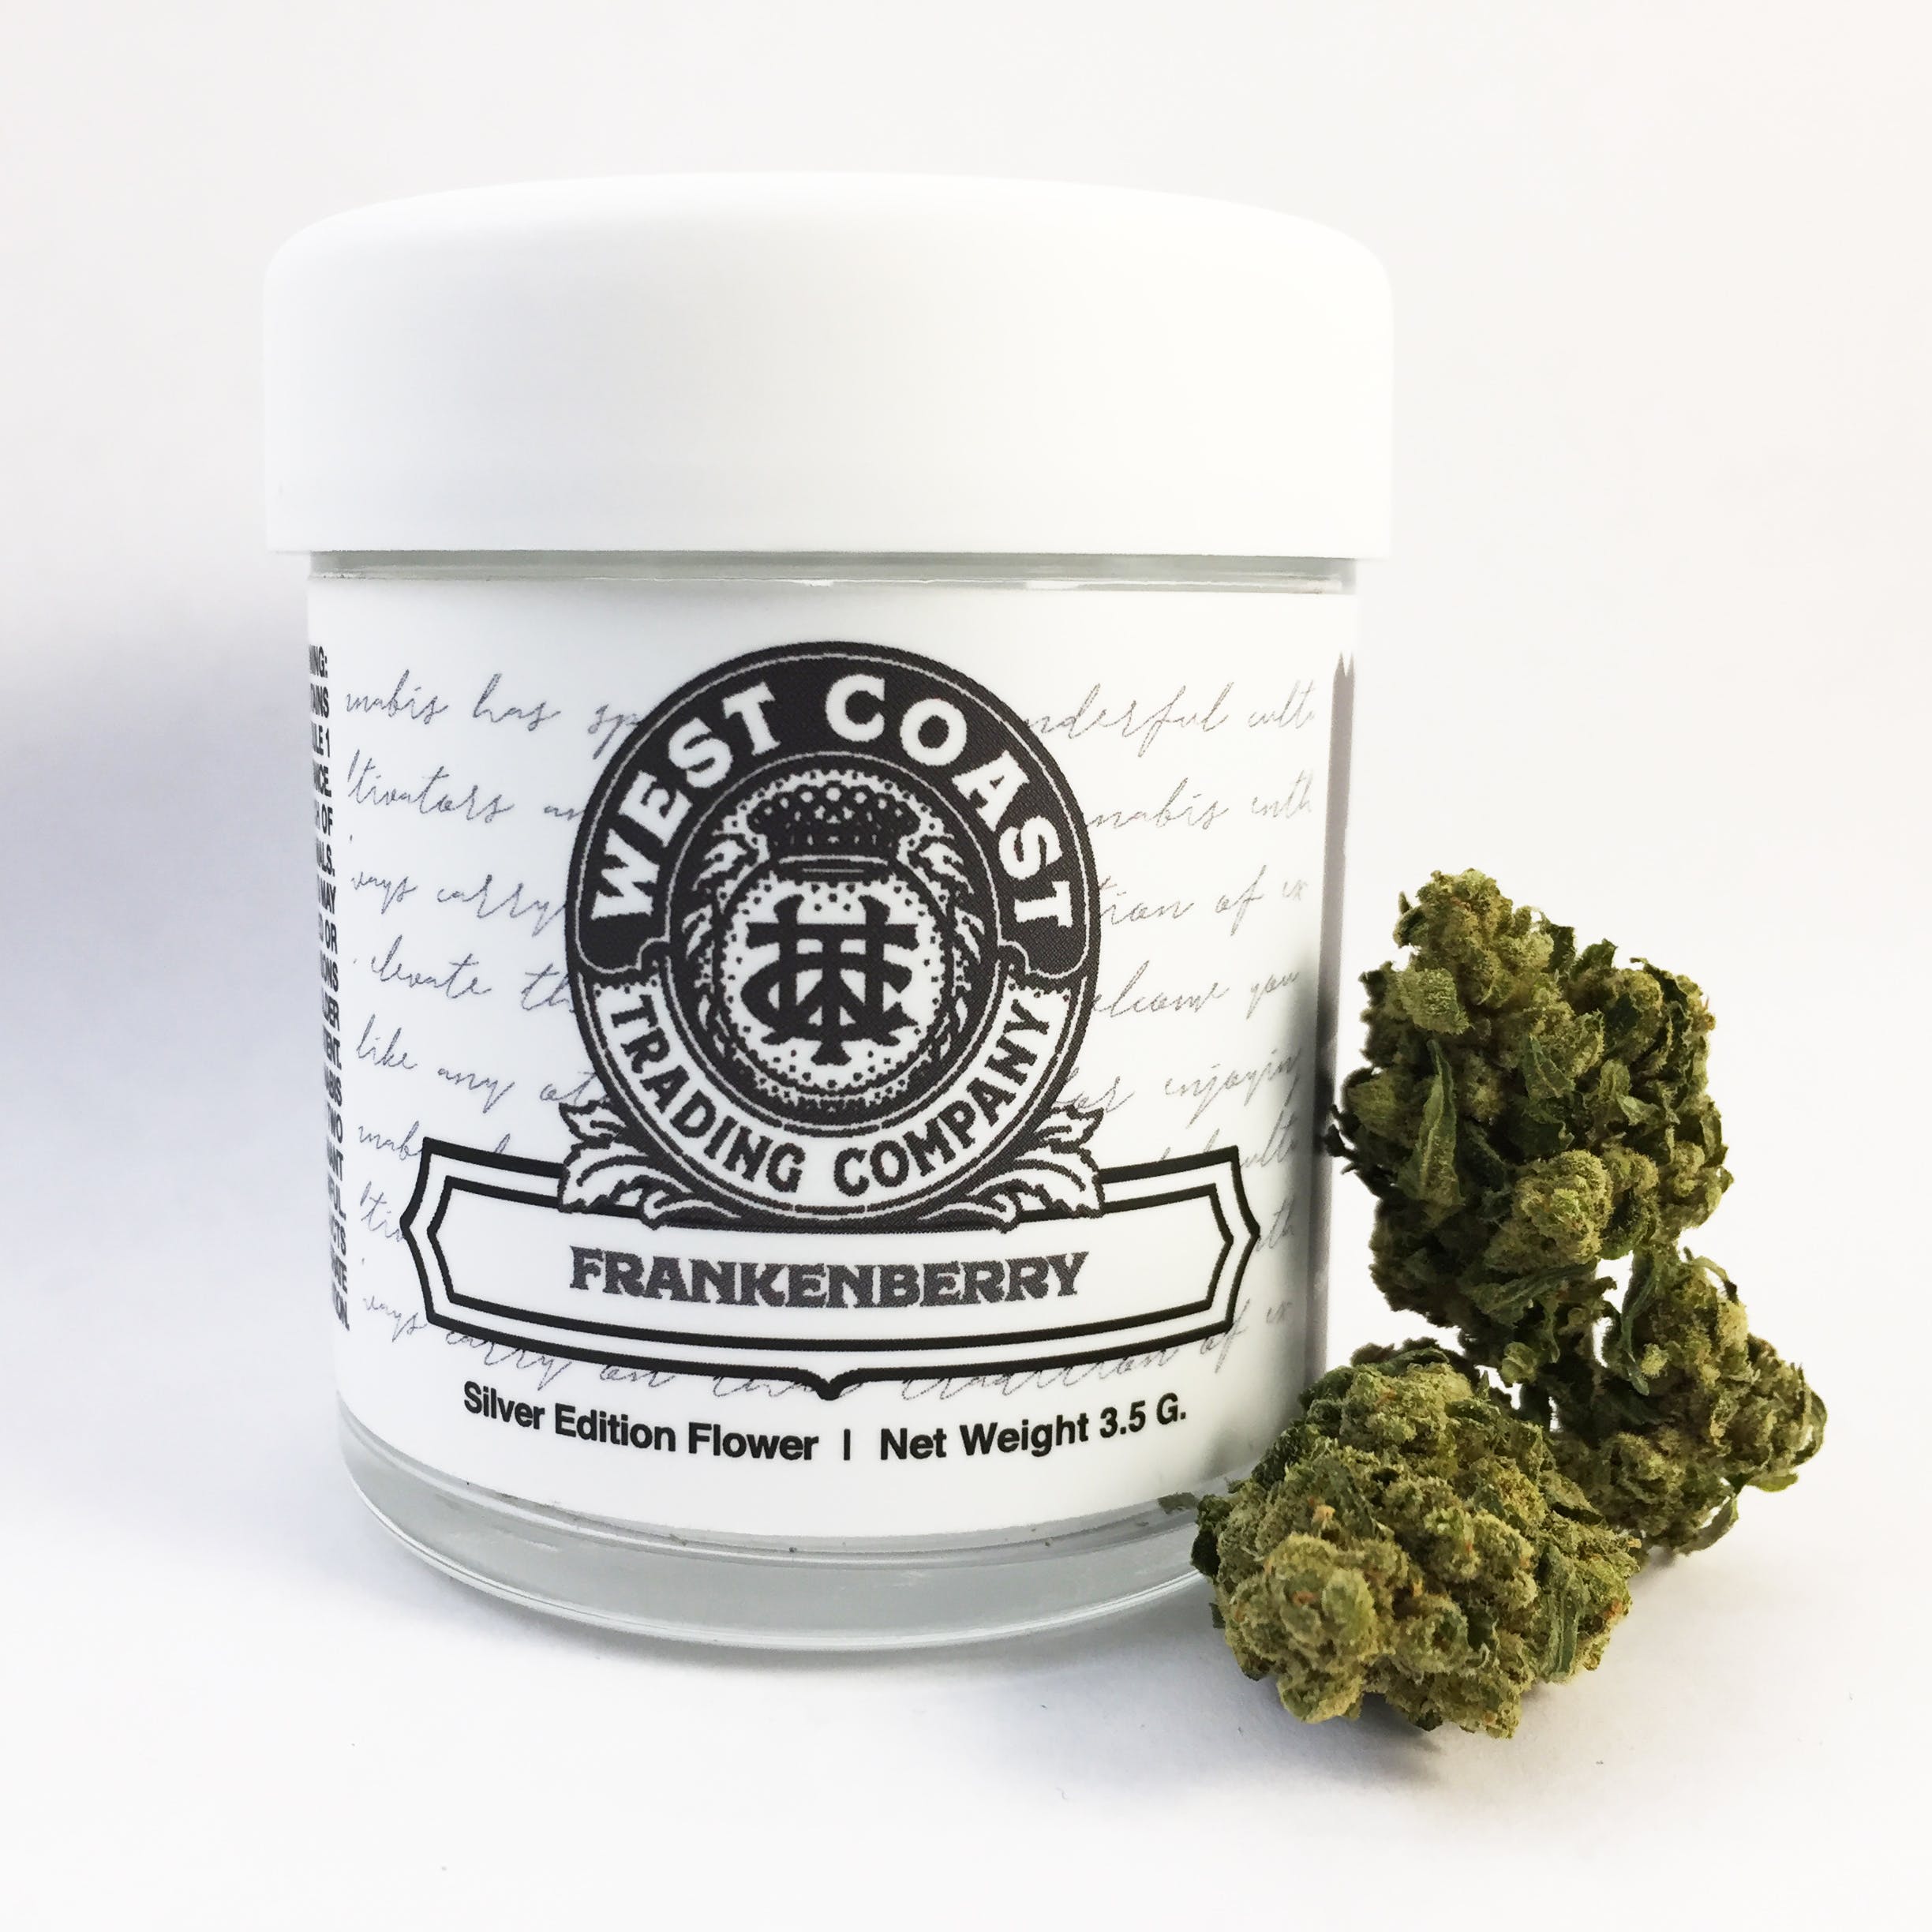 Frankenberry by West Coast Trading Co.